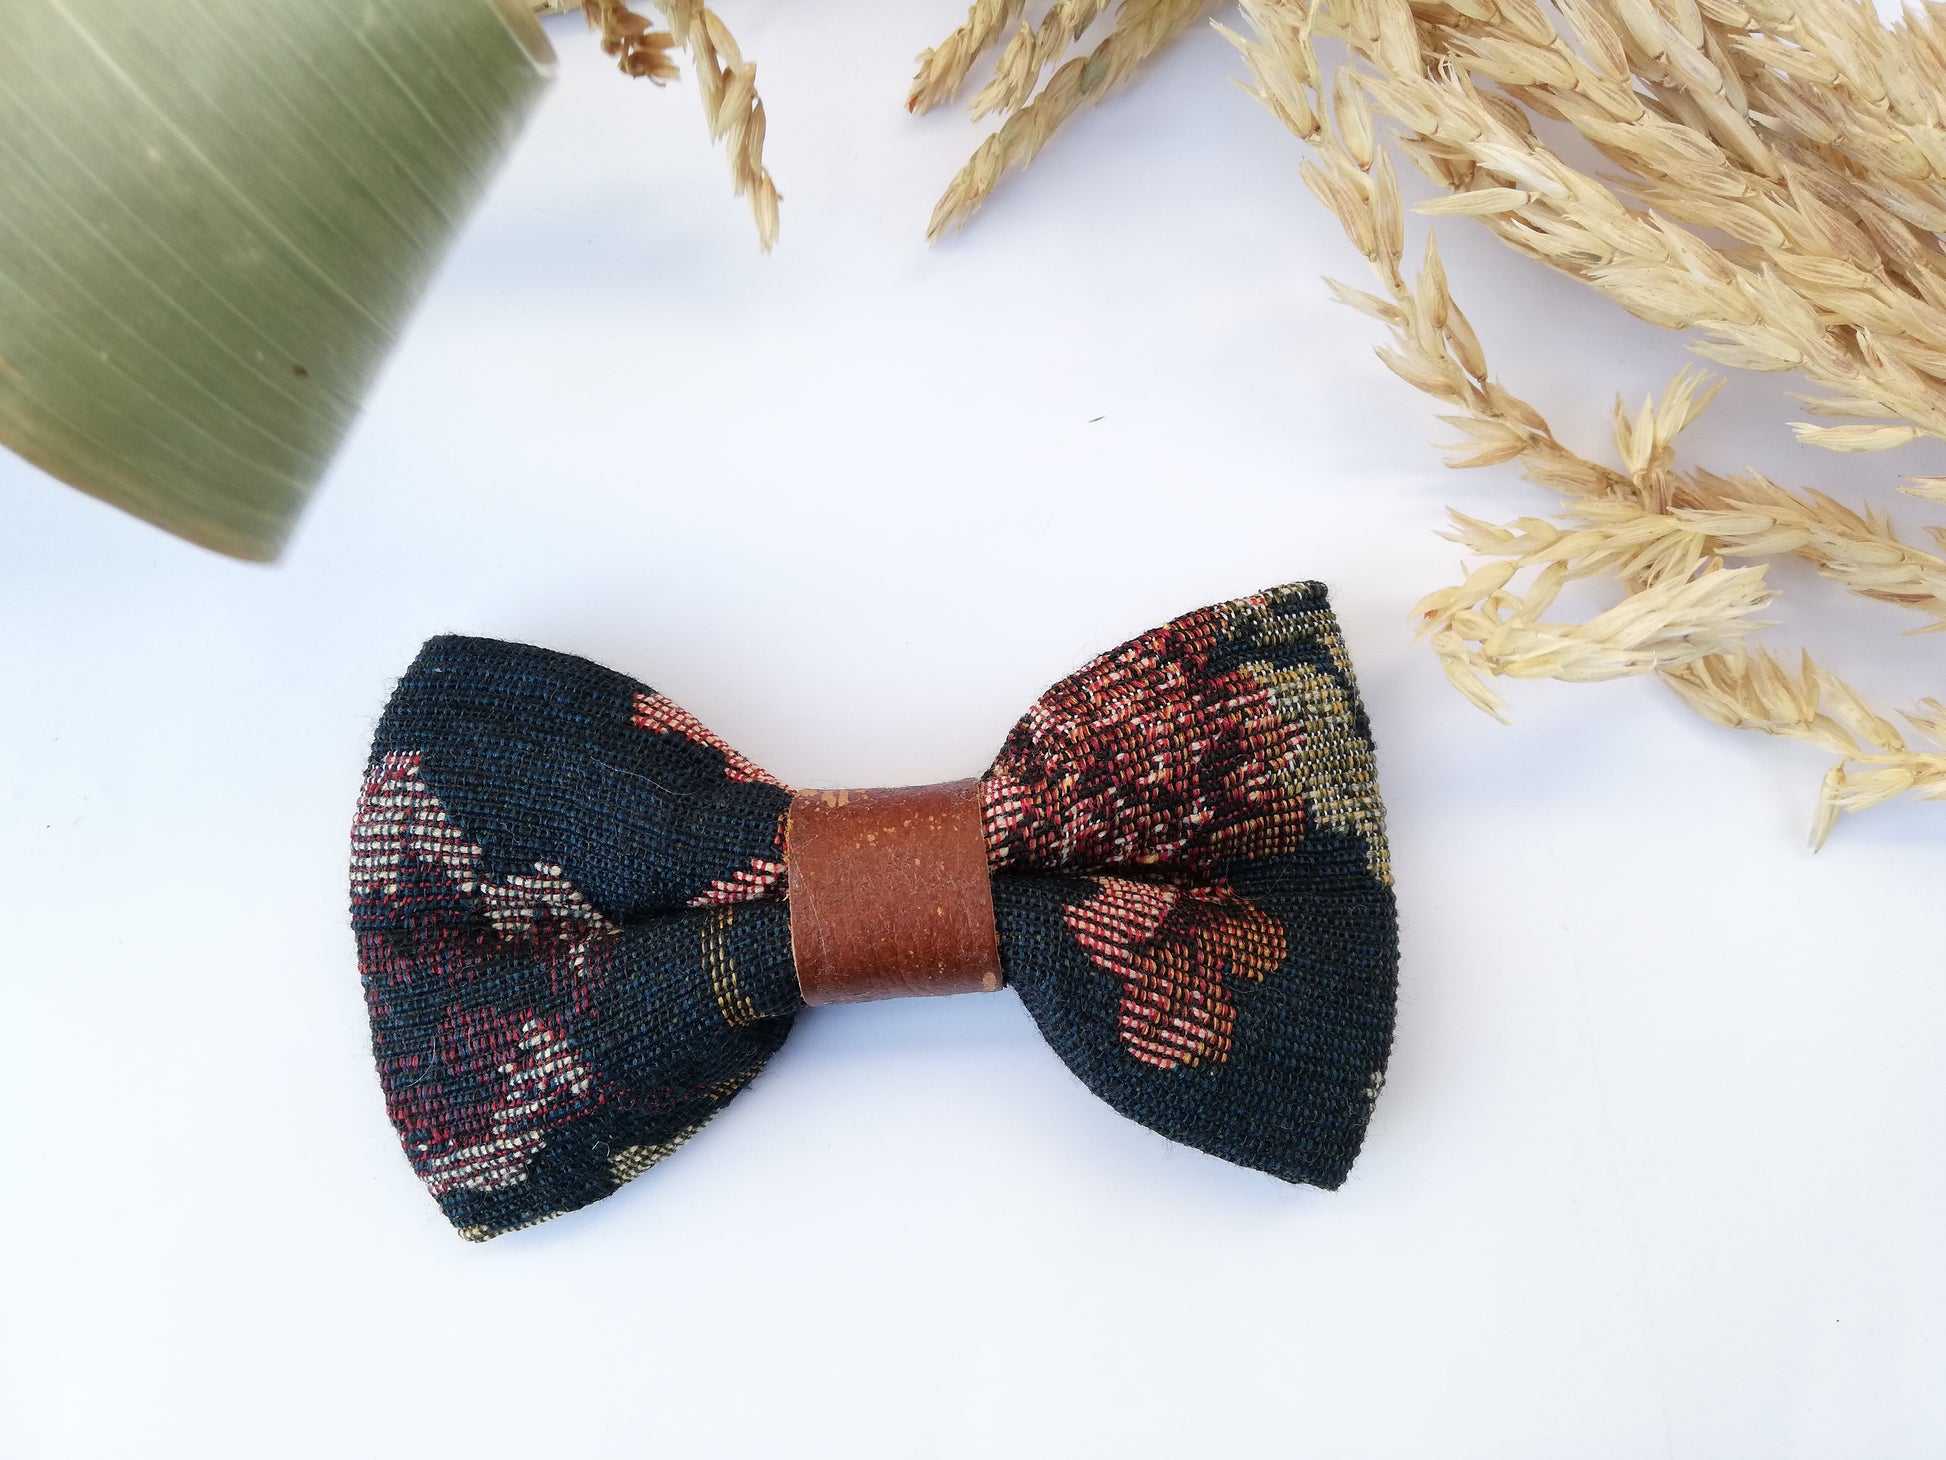 Vintage Leather Touch Bow Tie | Wedding Bow Ties South Africa